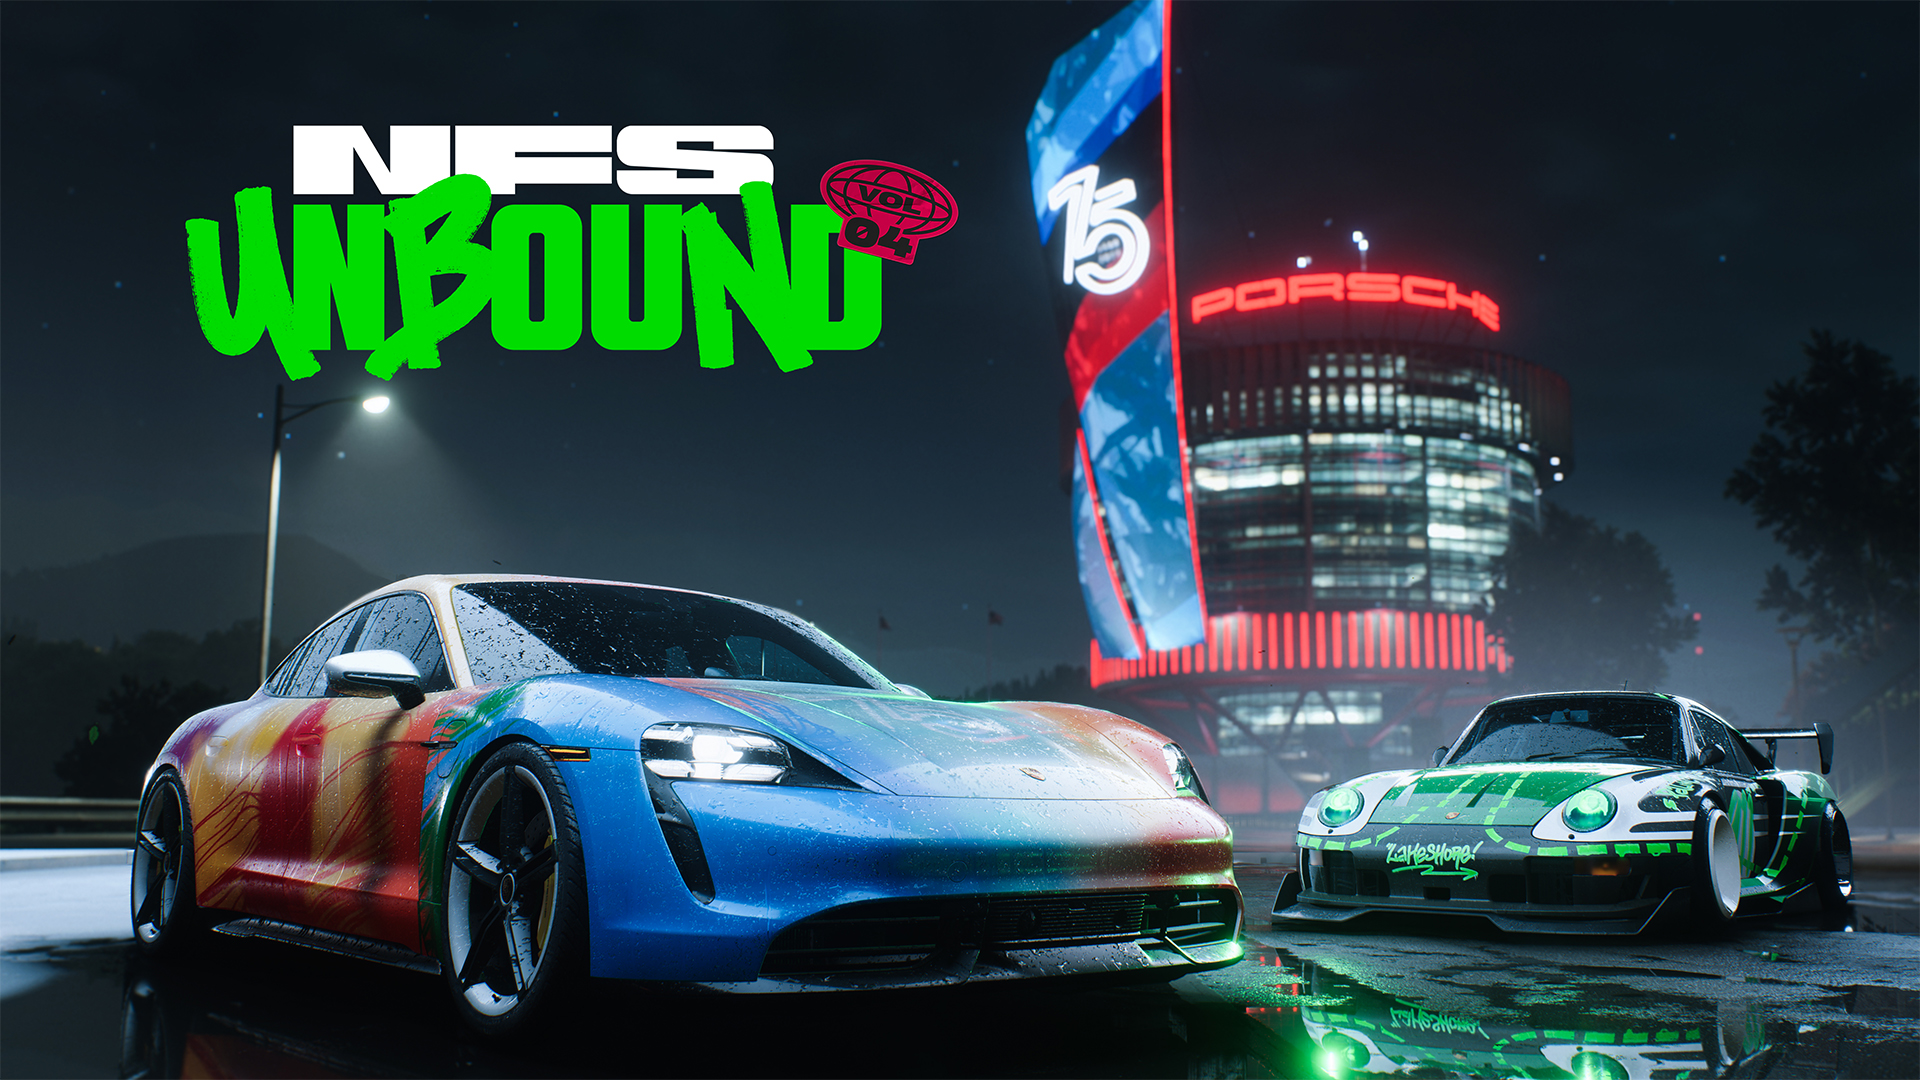 10 best Need for Speed games ranked: From Underground to Unbound